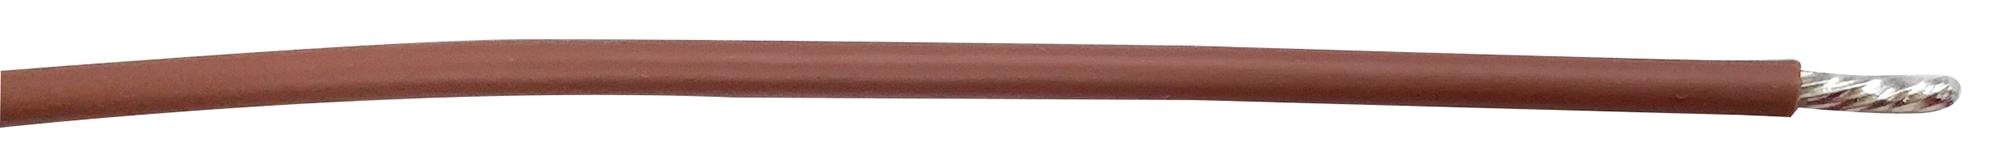 PP002490 CABLE WIRE, 18AWG, BROWN, 305M PRO POWER